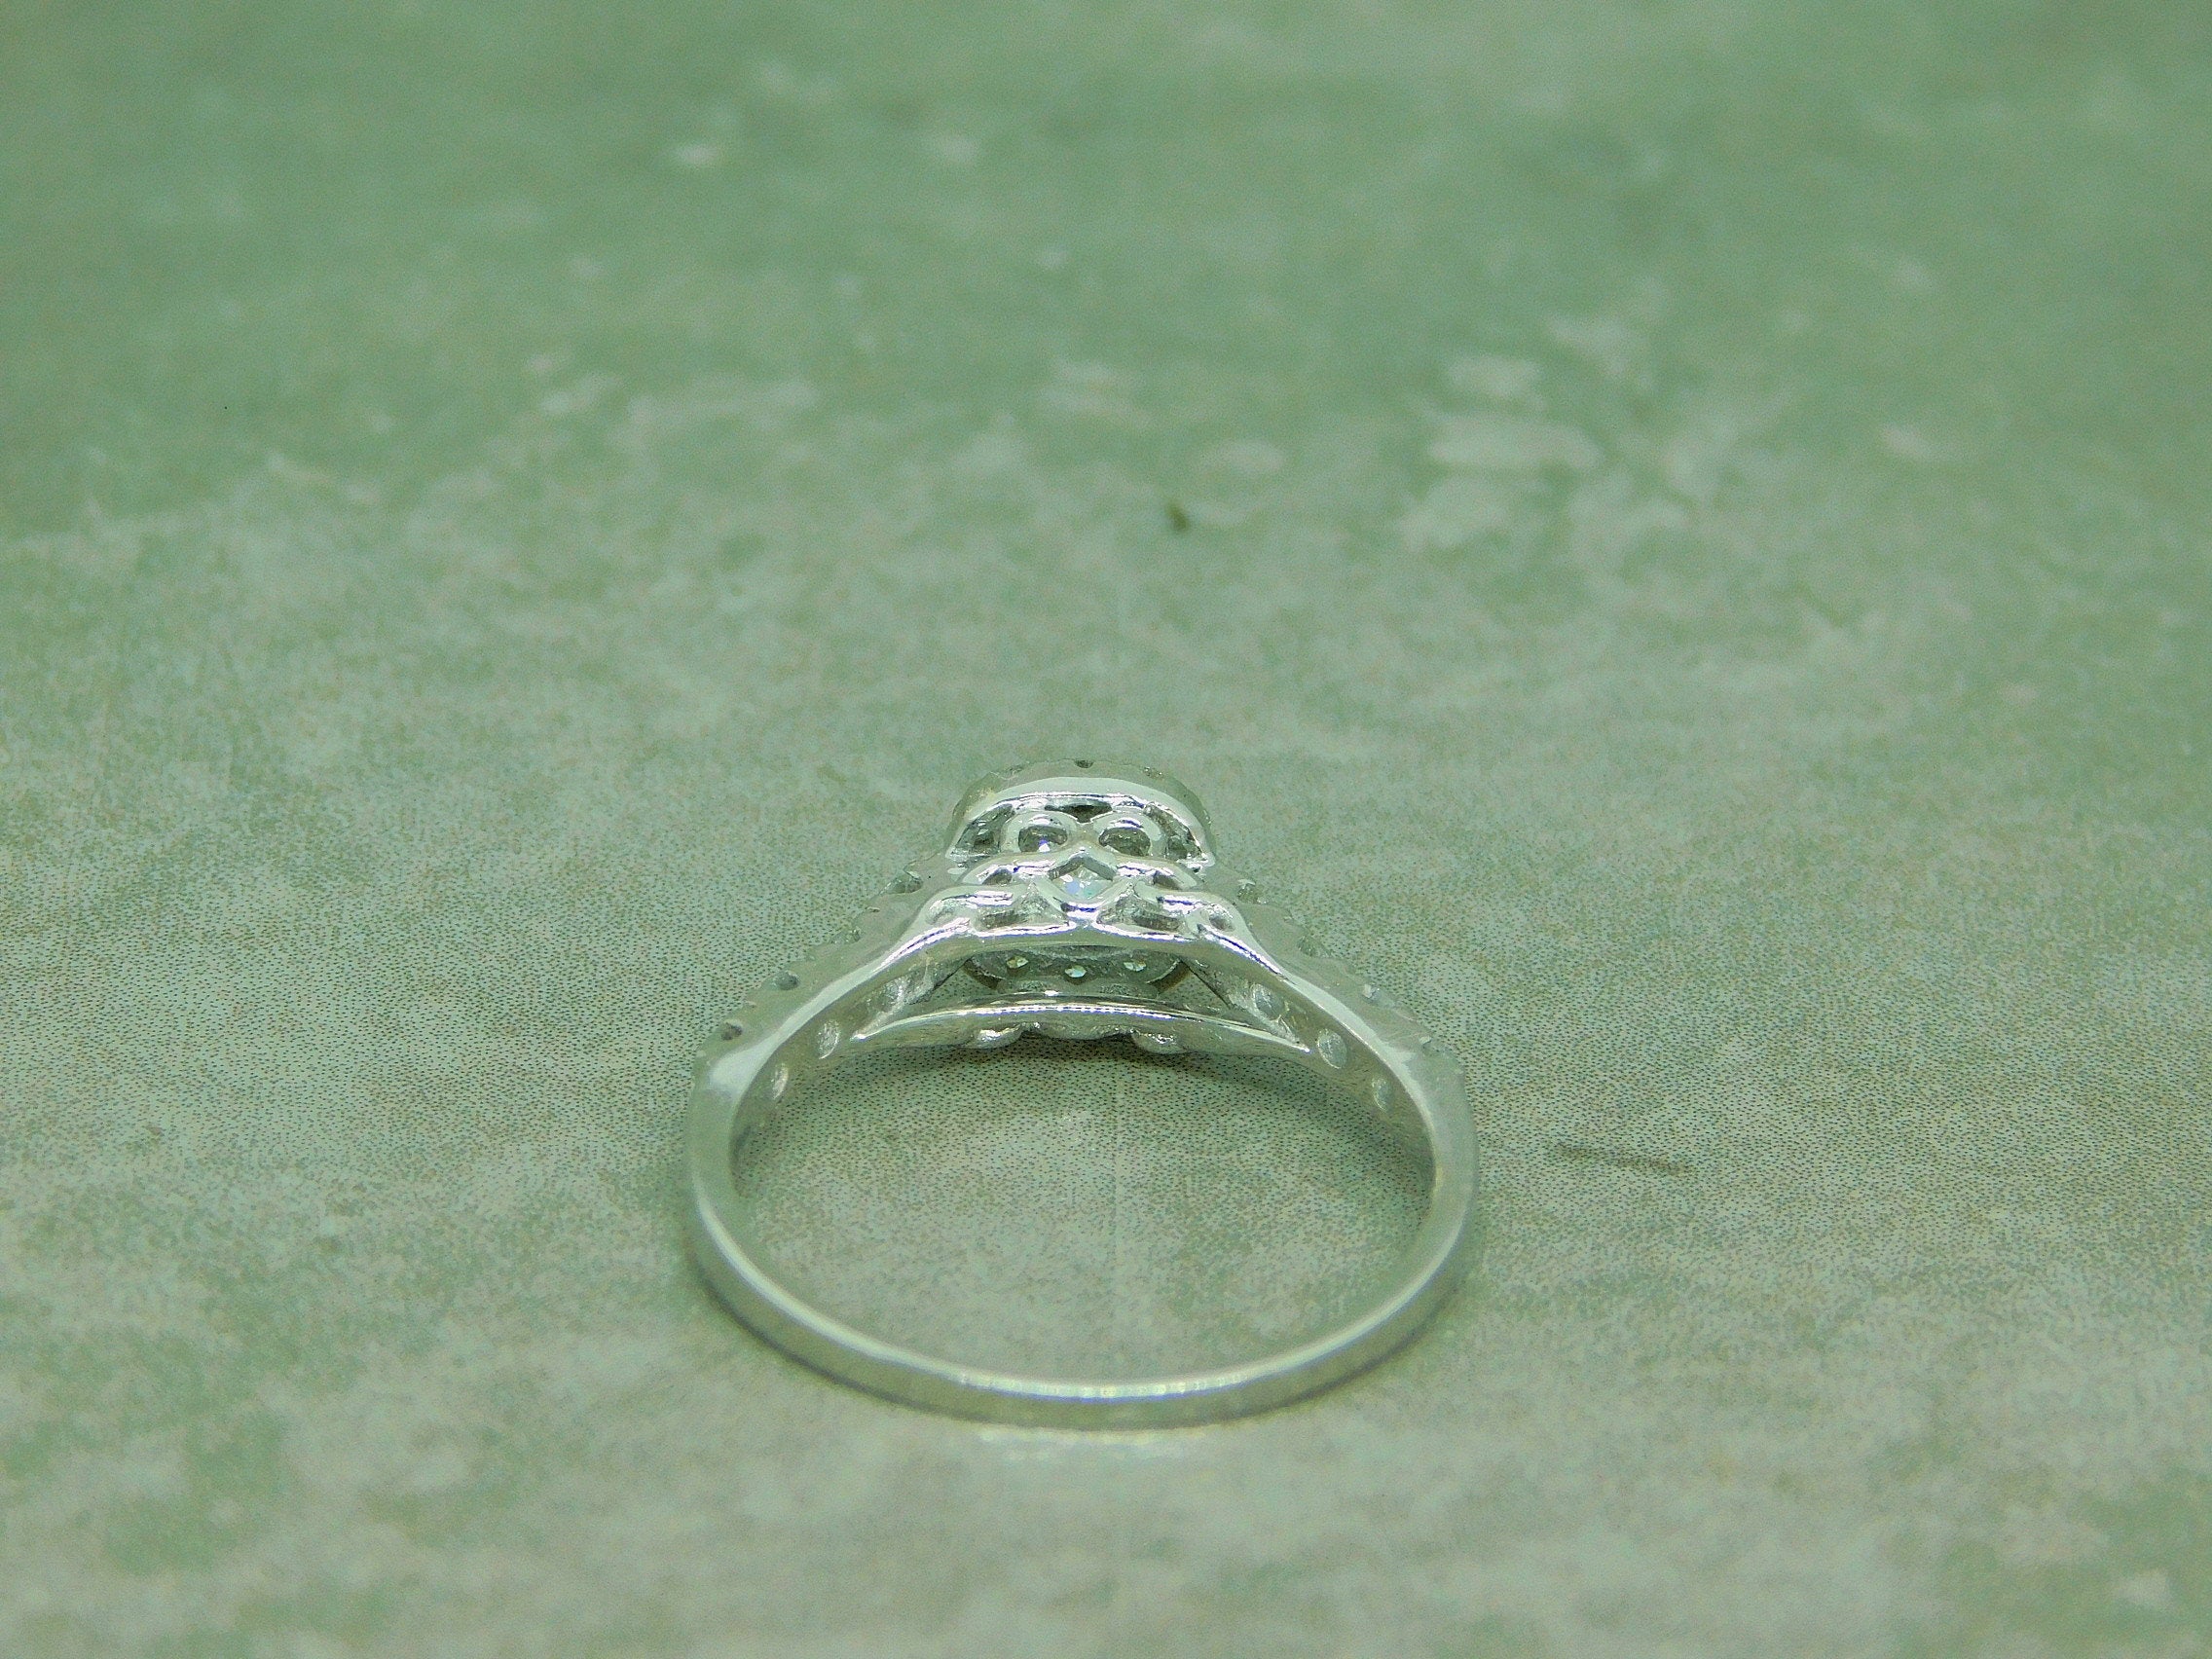 Diamond Engagement Ring With Matching Band